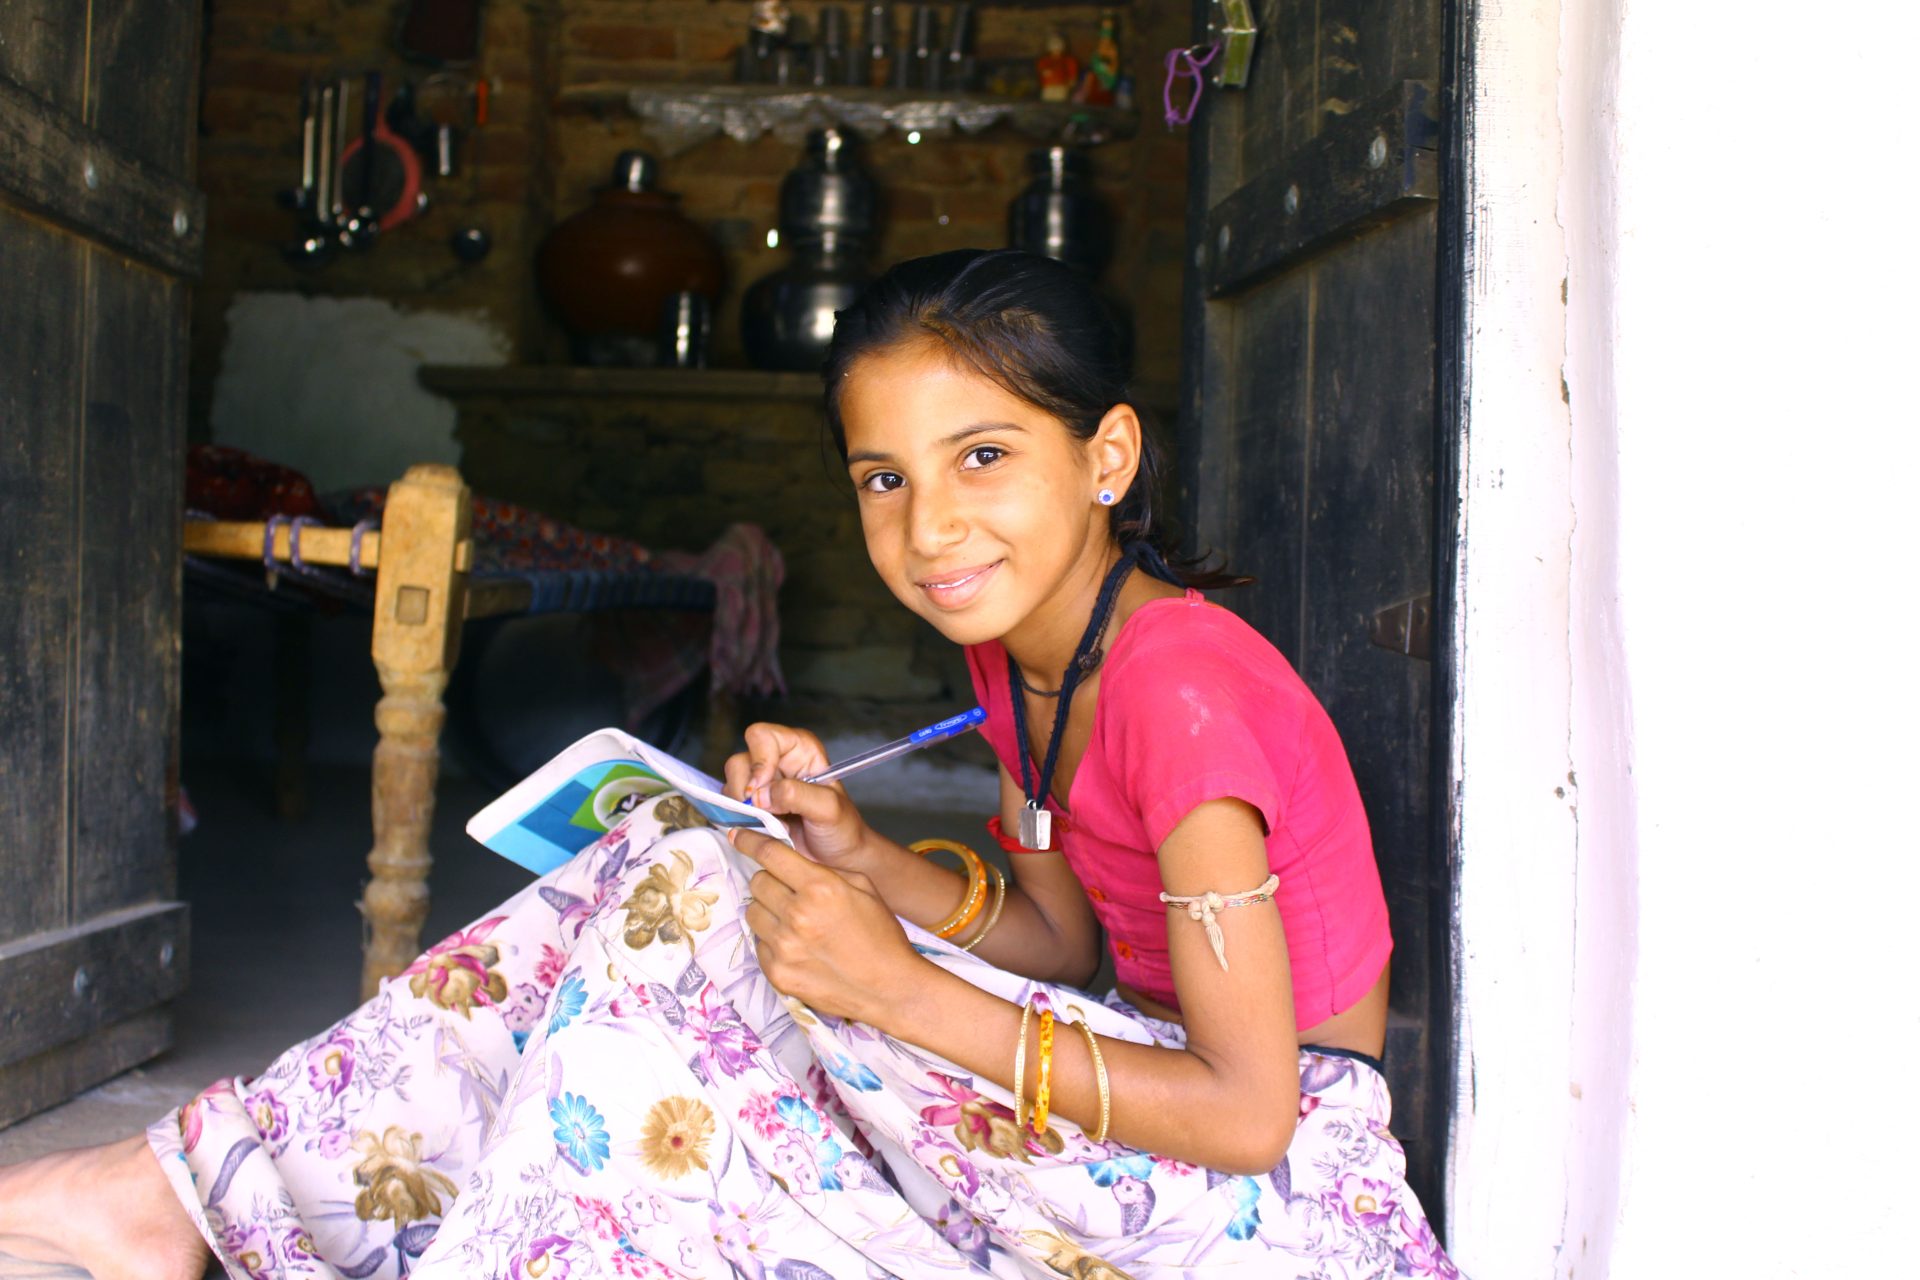 Improving Quality Of Education For Children Living In India’s Remote, Rural And Marginalised Communities